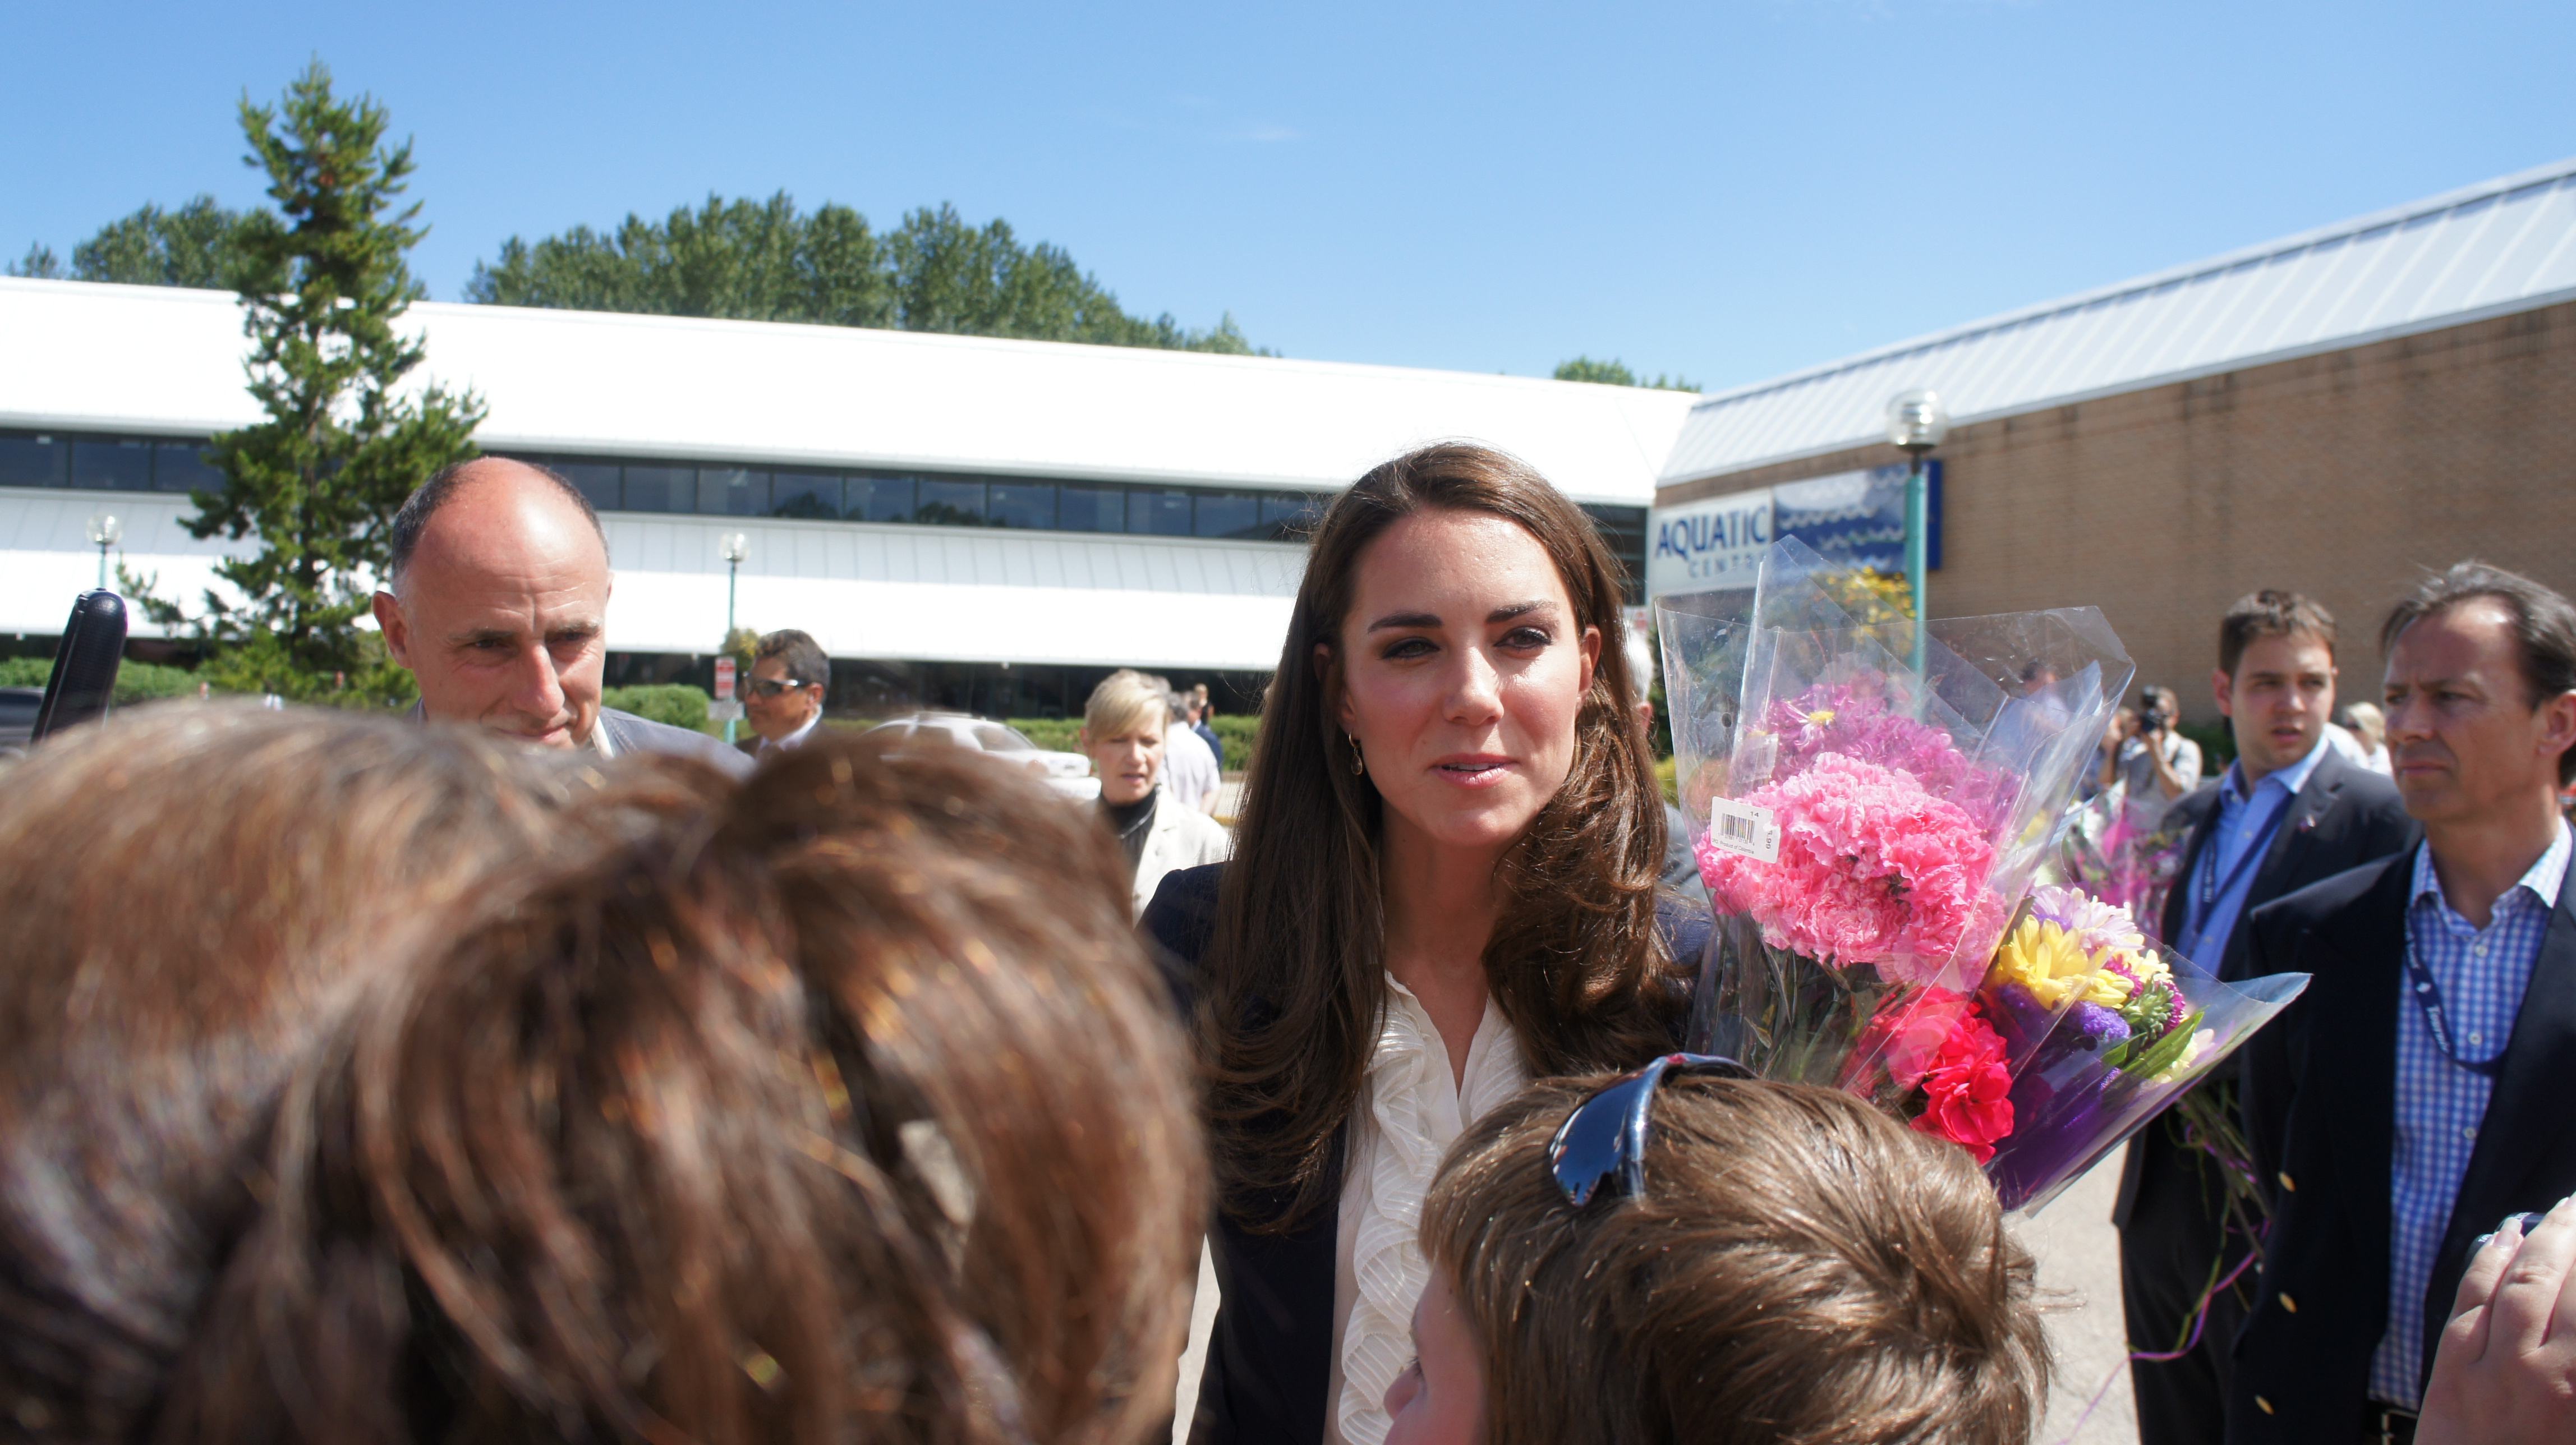 Duchess chats with Red Cross volunteer.